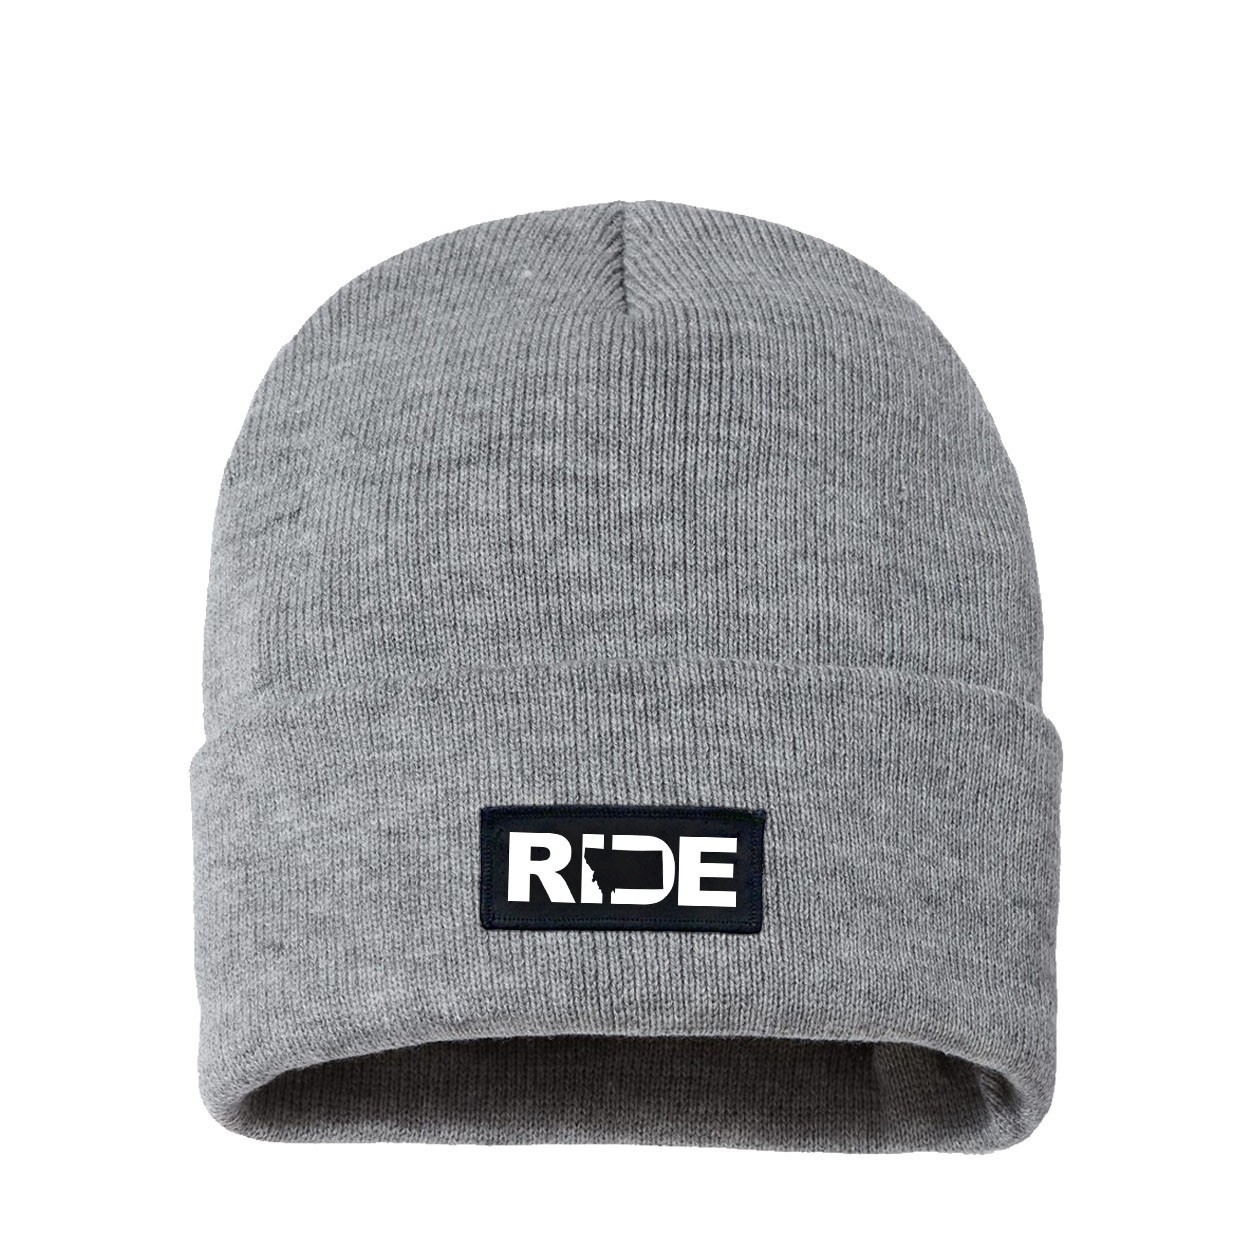 Ride Montana Night Out Woven Patch Night Out Sherpa Lined Cuffed Beanie Heather Gray (White Logo)